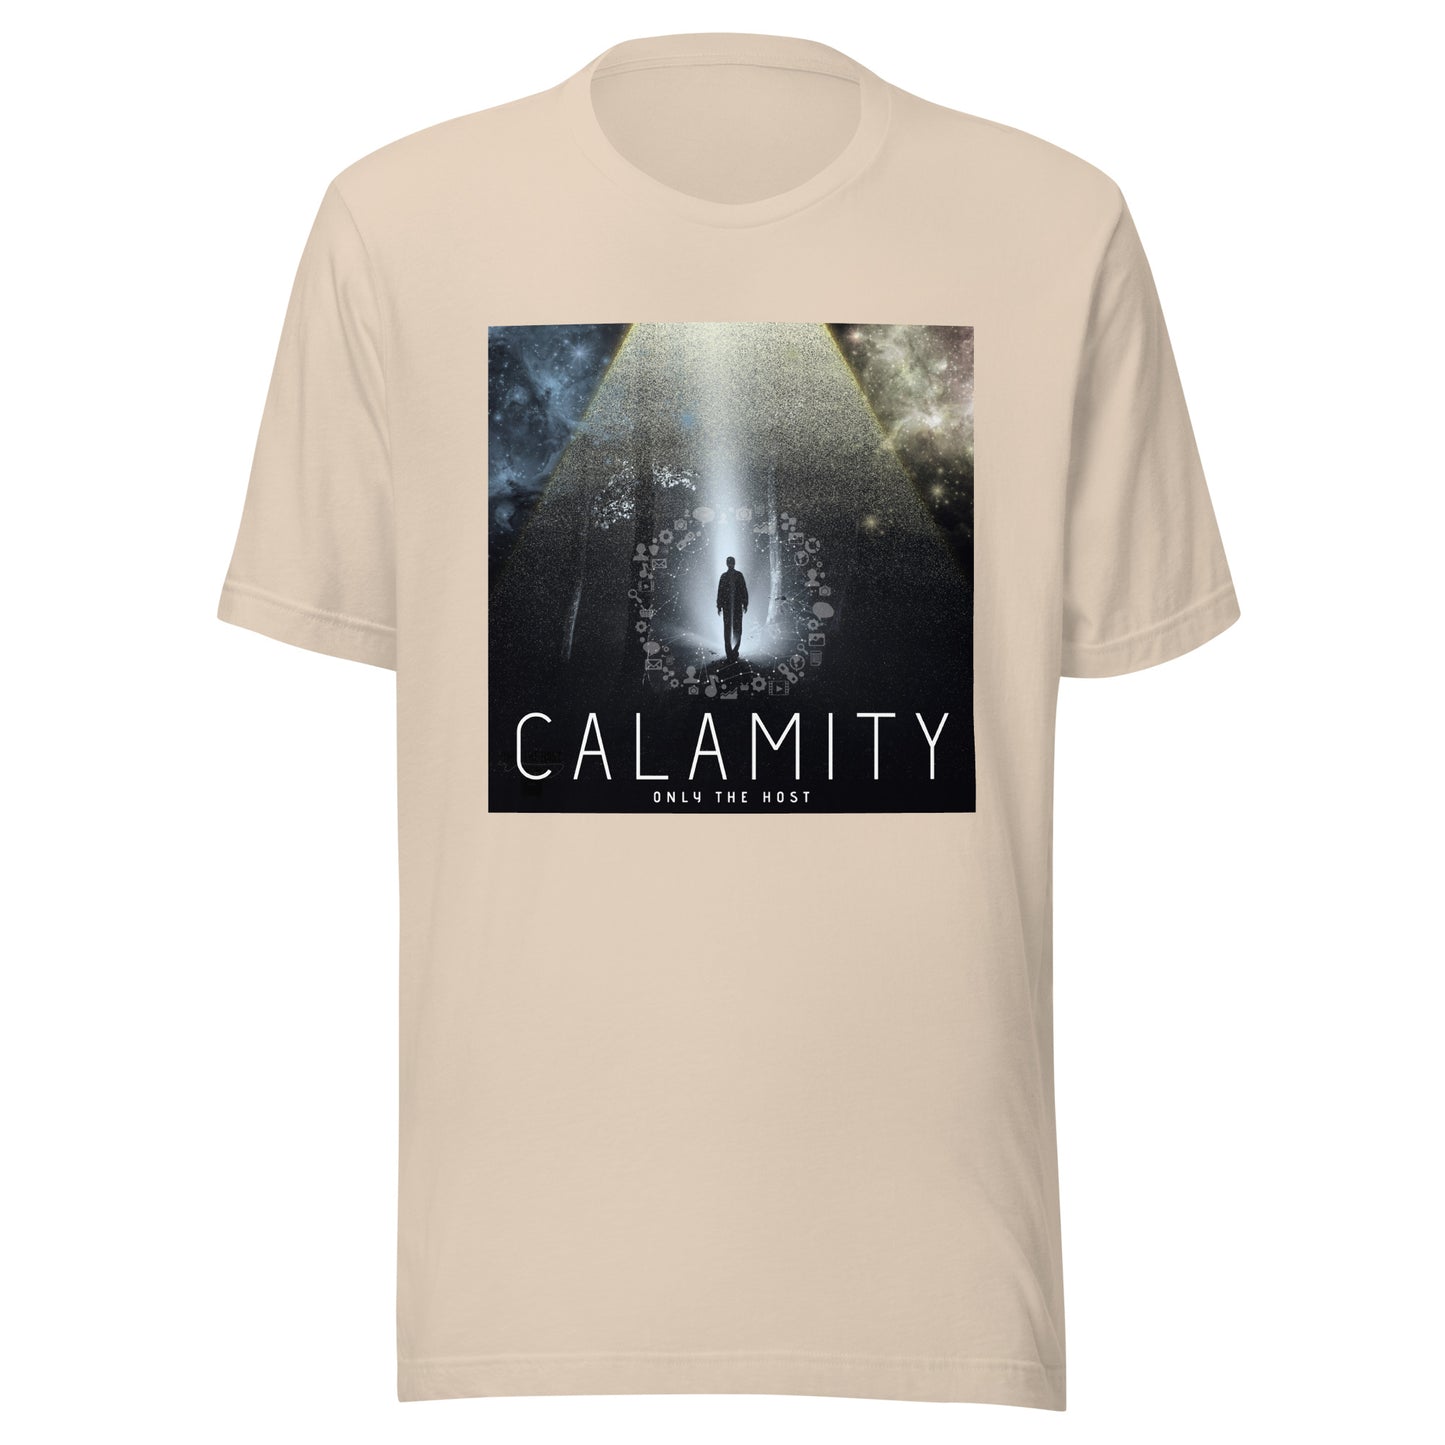 Only The Host - Calamity T-Shirt